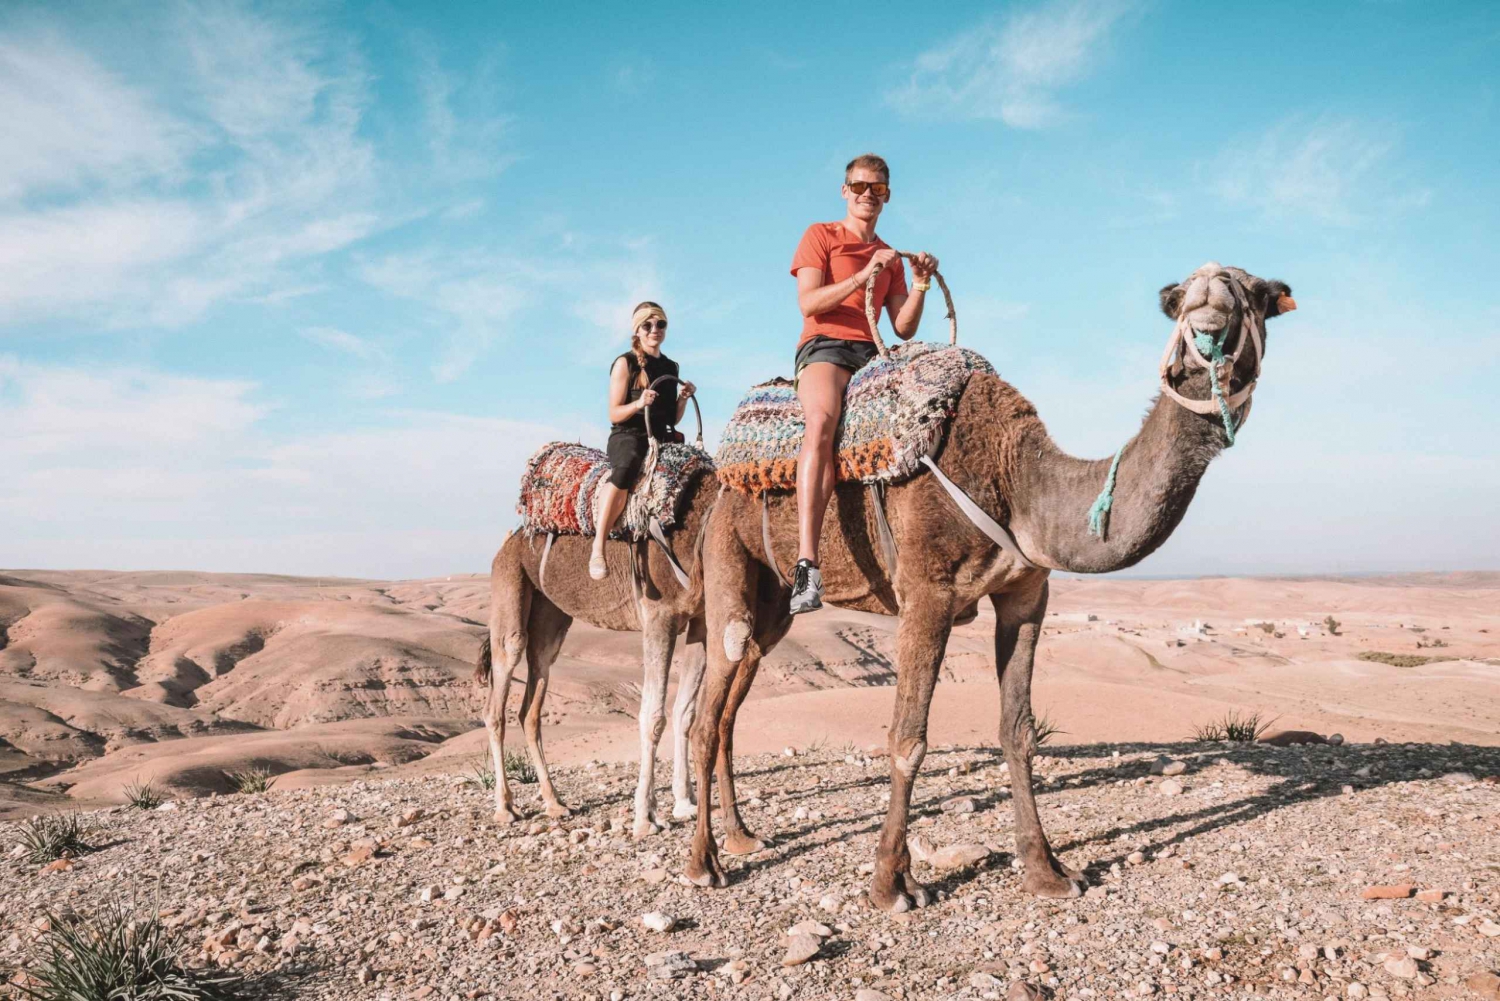 Marrakesh: Full-Day Desert and Mountain Tour with Camel Ride